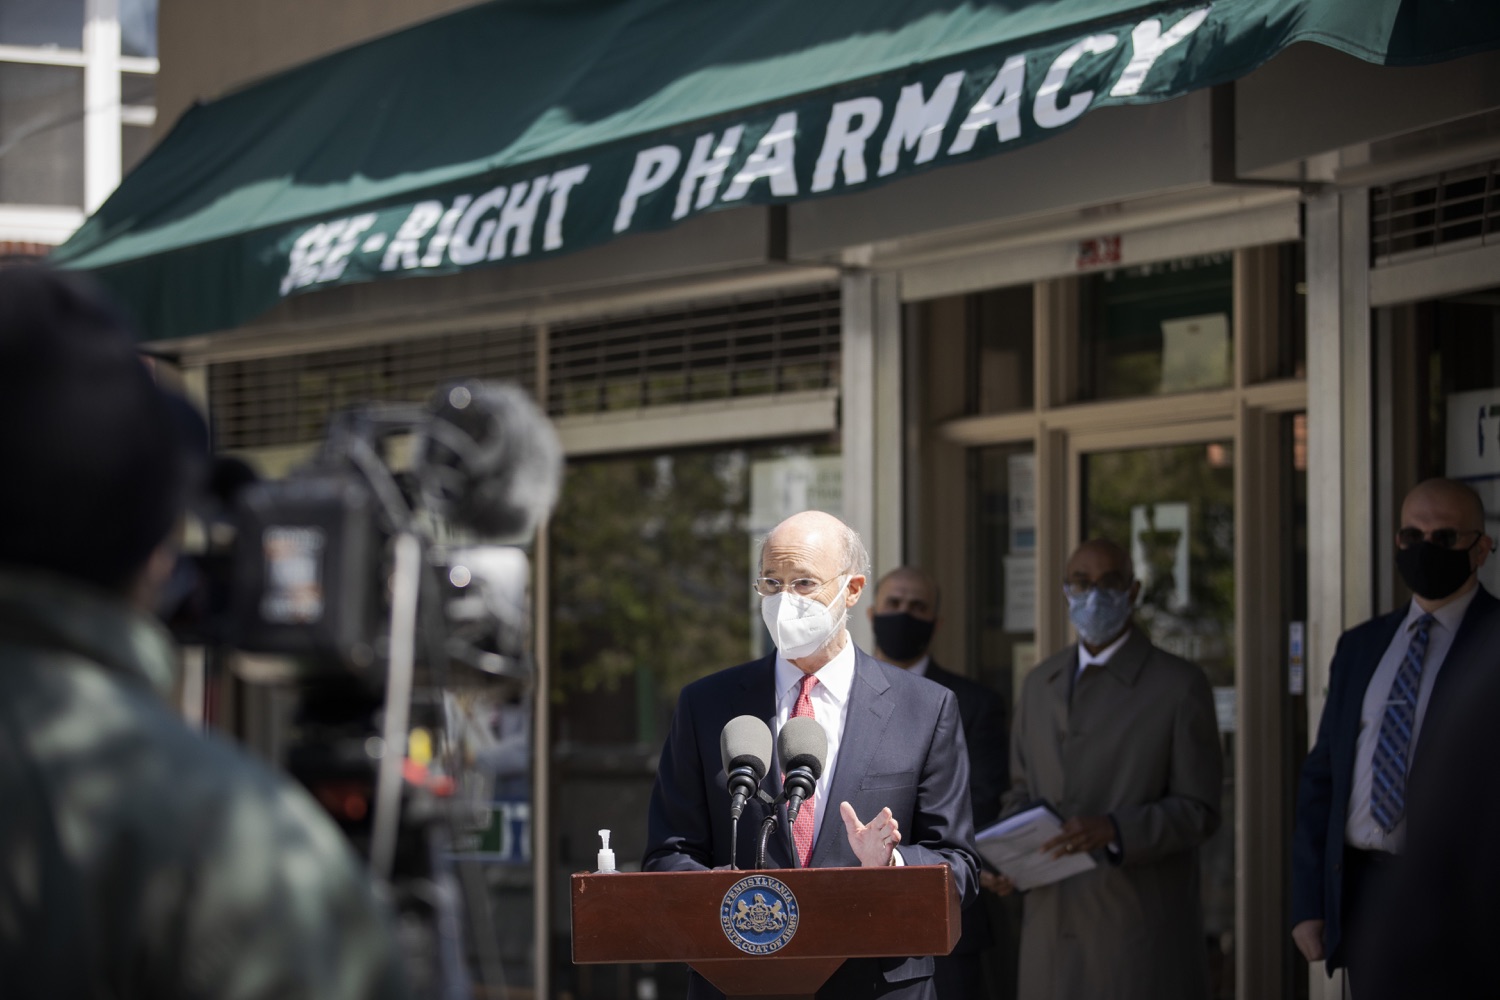 Pennsylvania Governor Tom Wolf speaking with the press.  Governor Tom Wolf today visited See-Right Pharmacy in Harrisburg to learn more about how the local, neighborhood pharmacy is vaccinating community members and to talk about COVID-19 vaccine hesitancy in Pennsylvania. Harrisburg, PA  April 22, 2021<br><a href="https://filesource.amperwave.net/commonwealthofpa/photo/18704_gov_seeRight_dz_009.jpg" target="_blank">⇣ Download Photo</a>